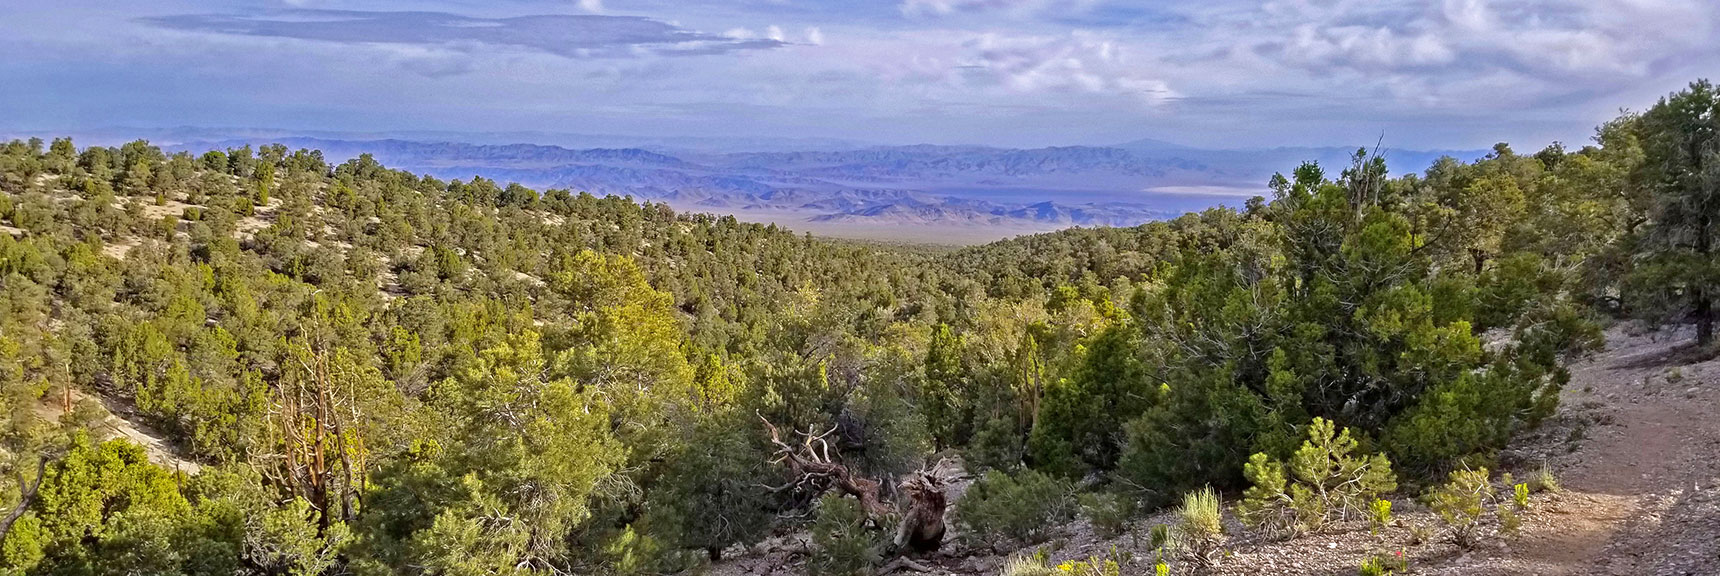 Center of Mud Springs Loop and Beyond. We're on the East Side of the Loop. | Pinyon Pine Loop Trail | Sawmill Trailhead | Lee Canyon | Mt Charleston Wilderness | Spring Mountains, Nevada